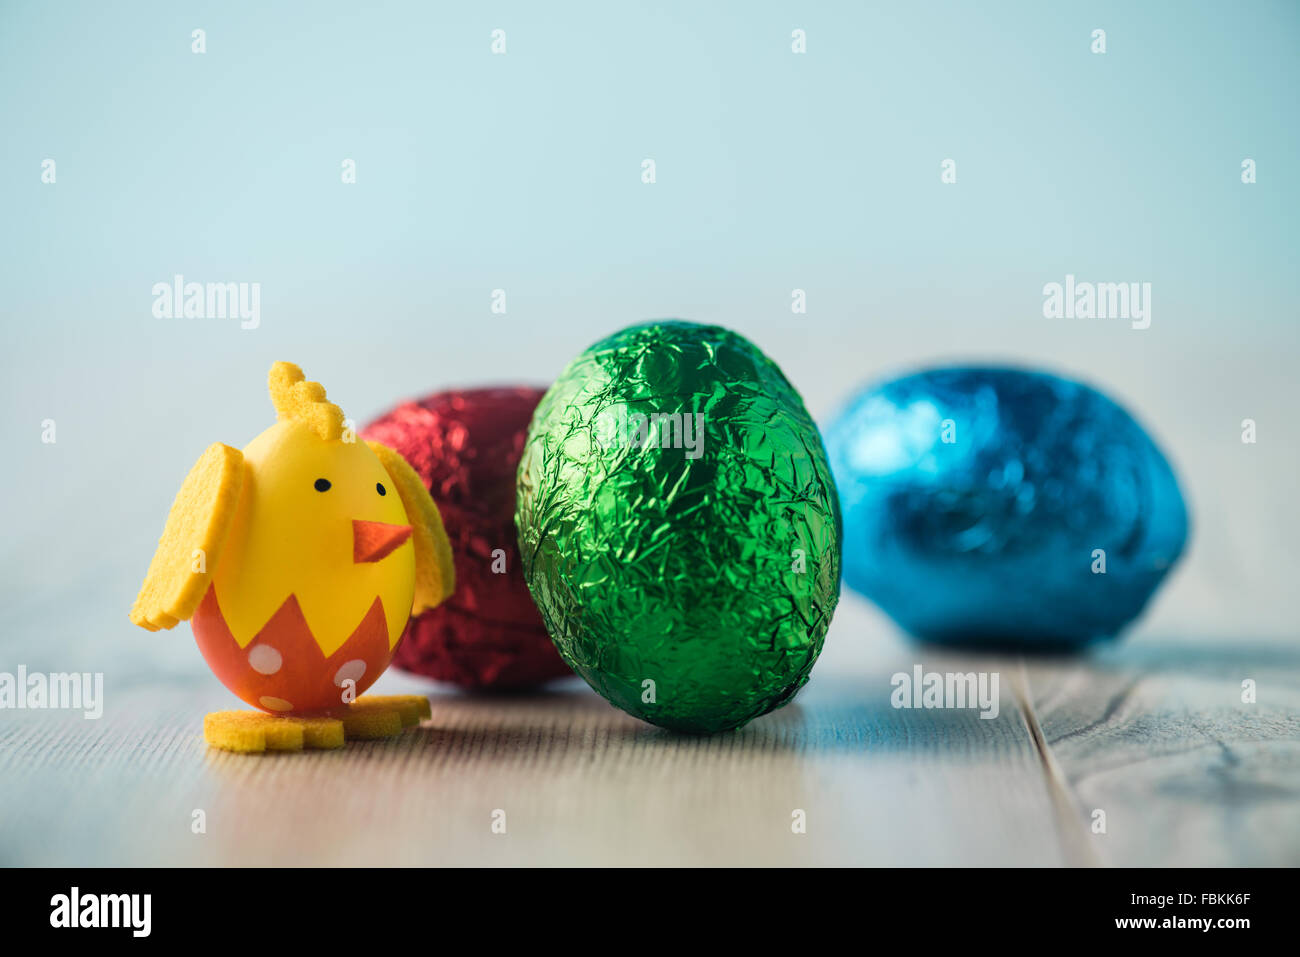 Chicken figurine, red, green and blue easter egg on a white table Stock Photo